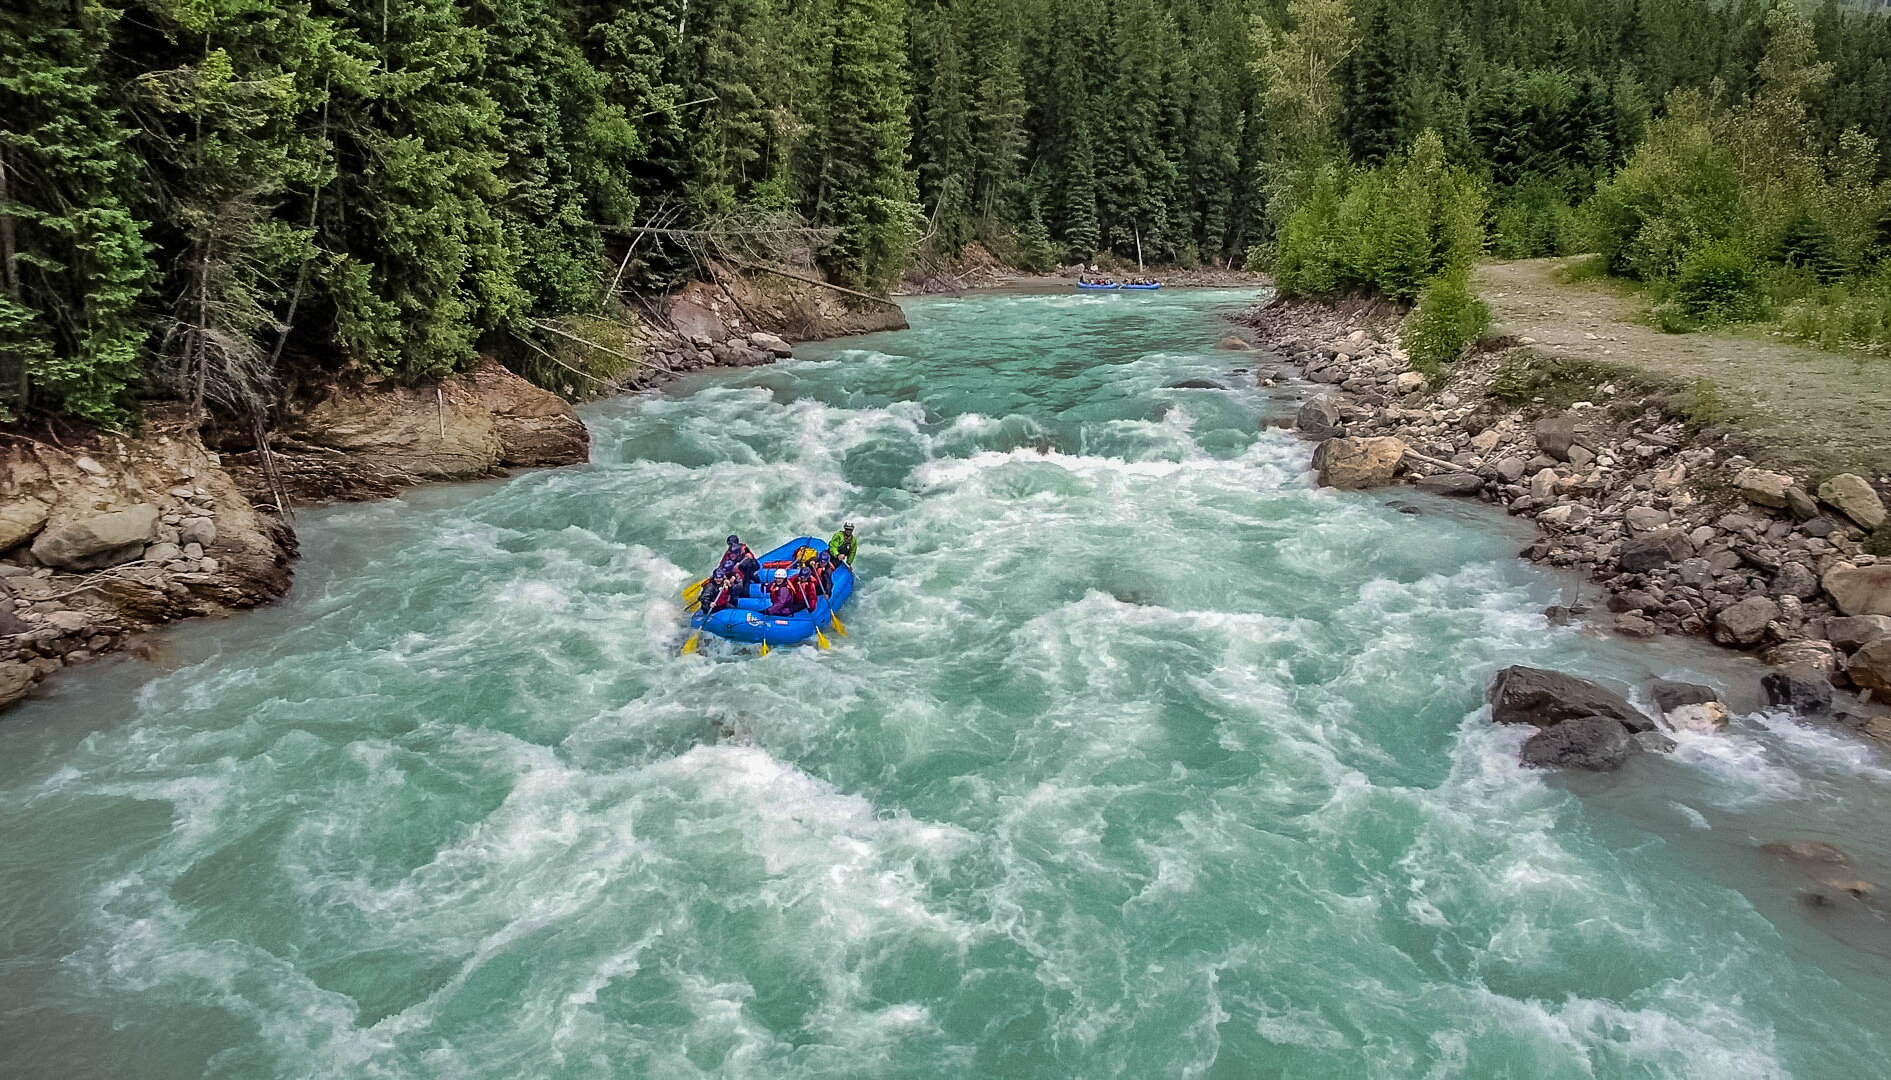 Rafting in the canyon of the Kicking Horse River